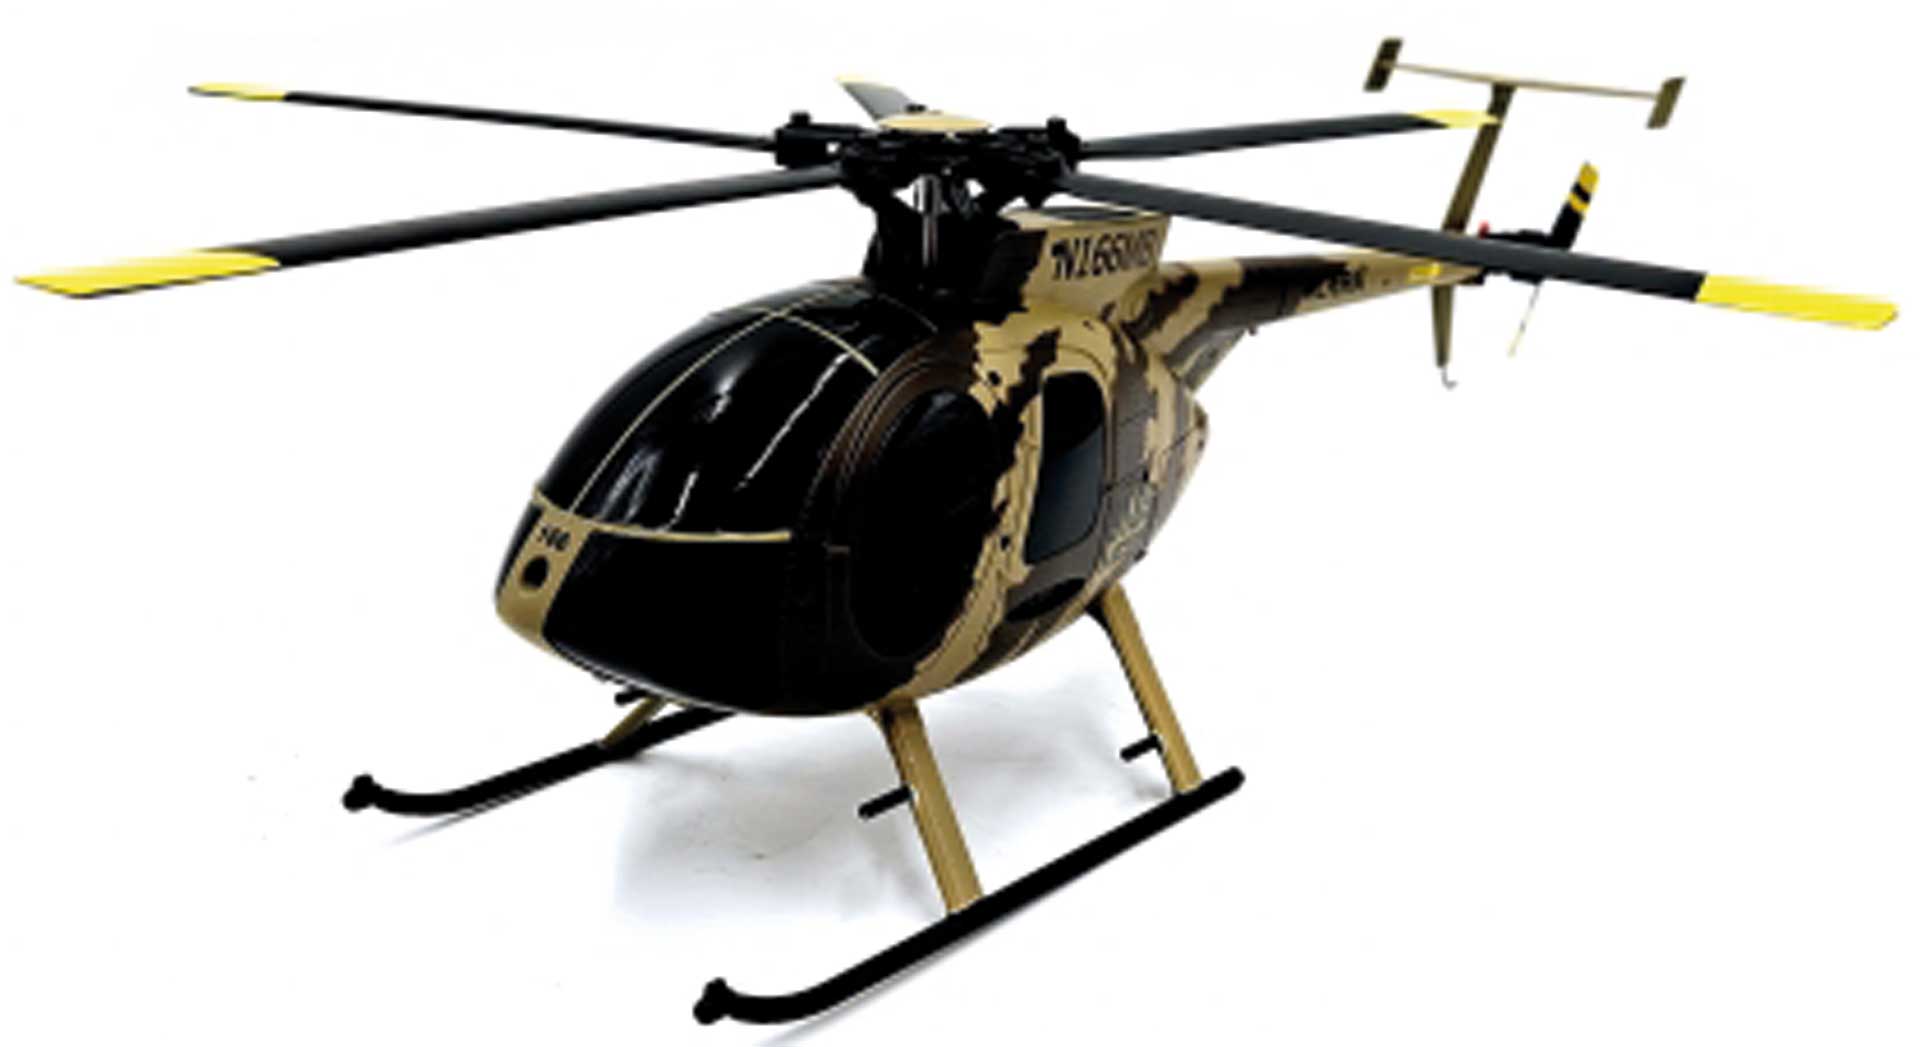 FM-ELECTRICS H500 180 helicopter 4-channel camouflage